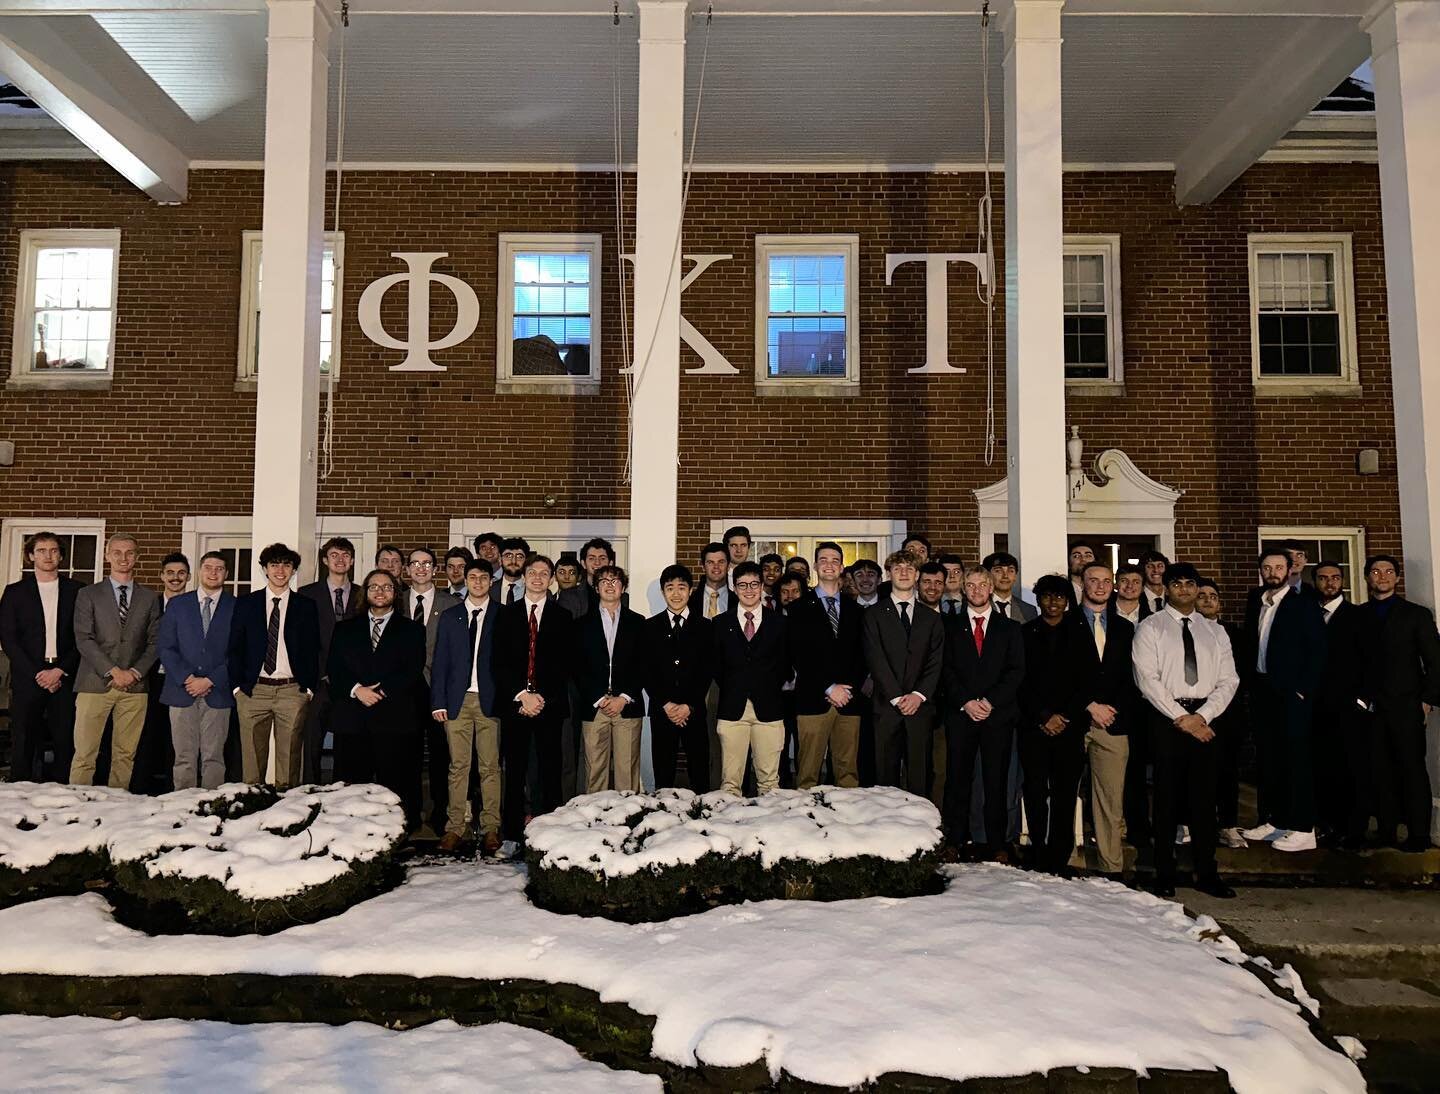 Big welcome to our new member class, the Chi class of 2023!